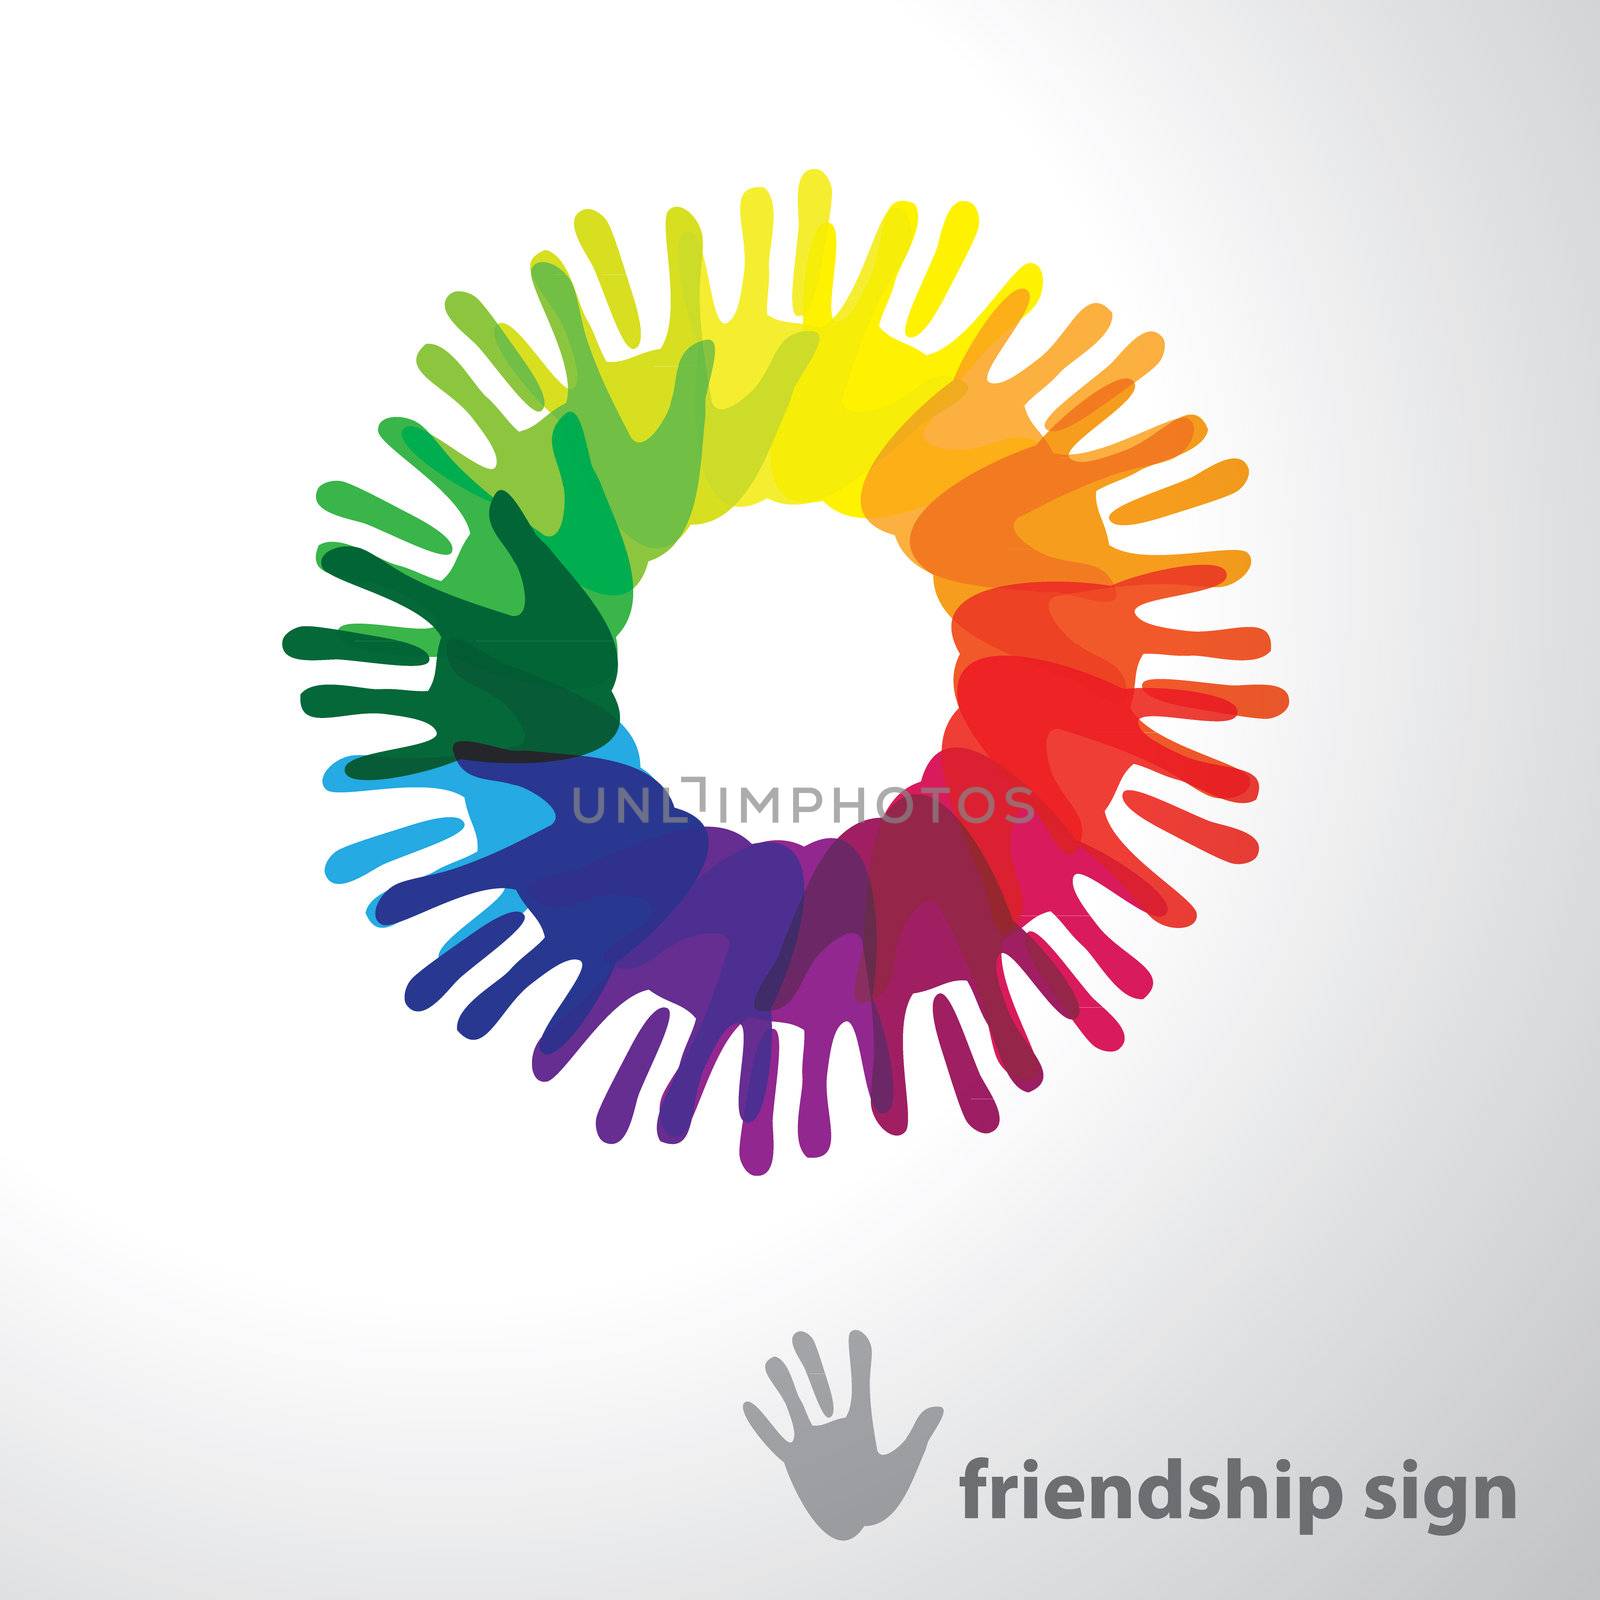 Sign of friendship. Vector design concept